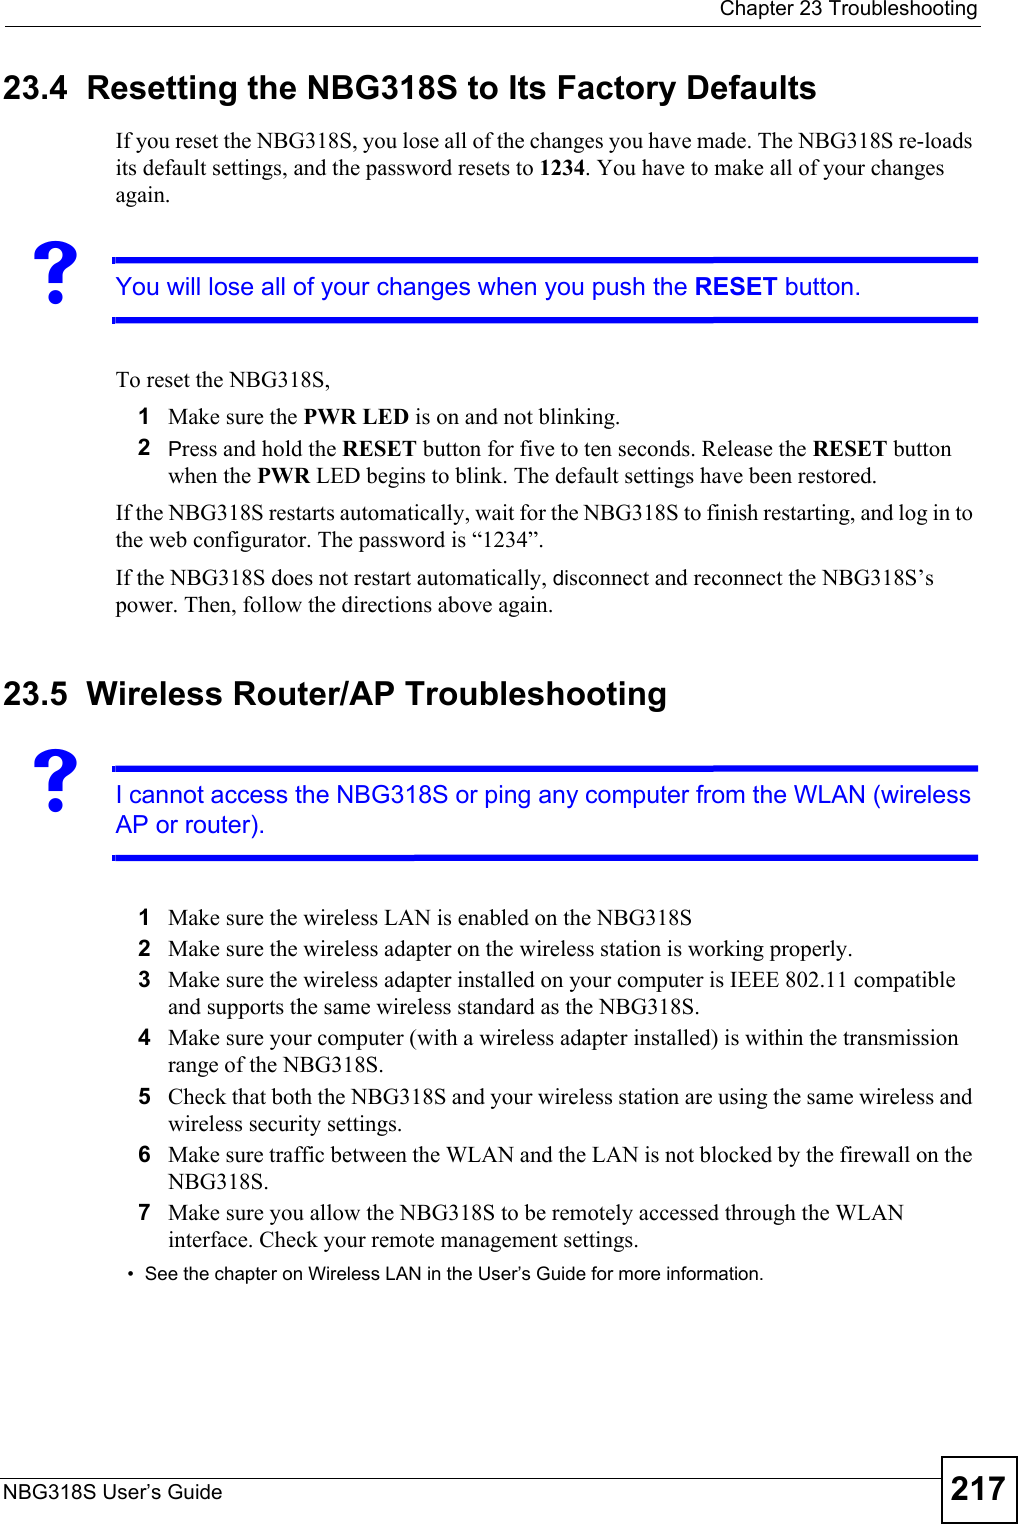  Chapter 23 TroubleshootingNBG318S User’s Guide 21723.4  Resetting the NBG318S to Its Factory Defaults If you reset the NBG318S, you lose all of the changes you have made. The NBG318S re-loads its default settings, and the password resets to 1234. You have to make all of your changes again.VYou will lose all of your changes when you push the RESET button.To reset the NBG318S,1Make sure the PWR LED is on and not blinking. 2Press and hold the RESET button for five to ten seconds. Release the RESET button when the PWR LED begins to blink. The default settings have been restored.If the NBG318S restarts automatically, wait for the NBG318S to finish restarting, and log in to the web configurator. The password is “1234”.If the NBG318S does not restart automatically, disconnect and reconnect the NBG318S’s power. Then, follow the directions above again.23.5  Wireless Router/AP TroubleshootingVI cannot access the NBG318S or ping any computer from the WLAN (wireless AP or router).1Make sure the wireless LAN is enabled on the NBG318S2Make sure the wireless adapter on the wireless station is working properly.3Make sure the wireless adapter installed on your computer is IEEE 802.11 compatible and supports the same wireless standard as the NBG318S.4Make sure your computer (with a wireless adapter installed) is within the transmission range of the NBG318S.5Check that both the NBG318S and your wireless station are using the same wireless and wireless security settings.6Make sure traffic between the WLAN and the LAN is not blocked by the firewall on the NBG318S. 7Make sure you allow the NBG318S to be remotely accessed through the WLAN interface. Check your remote management settings.• See the chapter on Wireless LAN in the User’s Guide for more information.